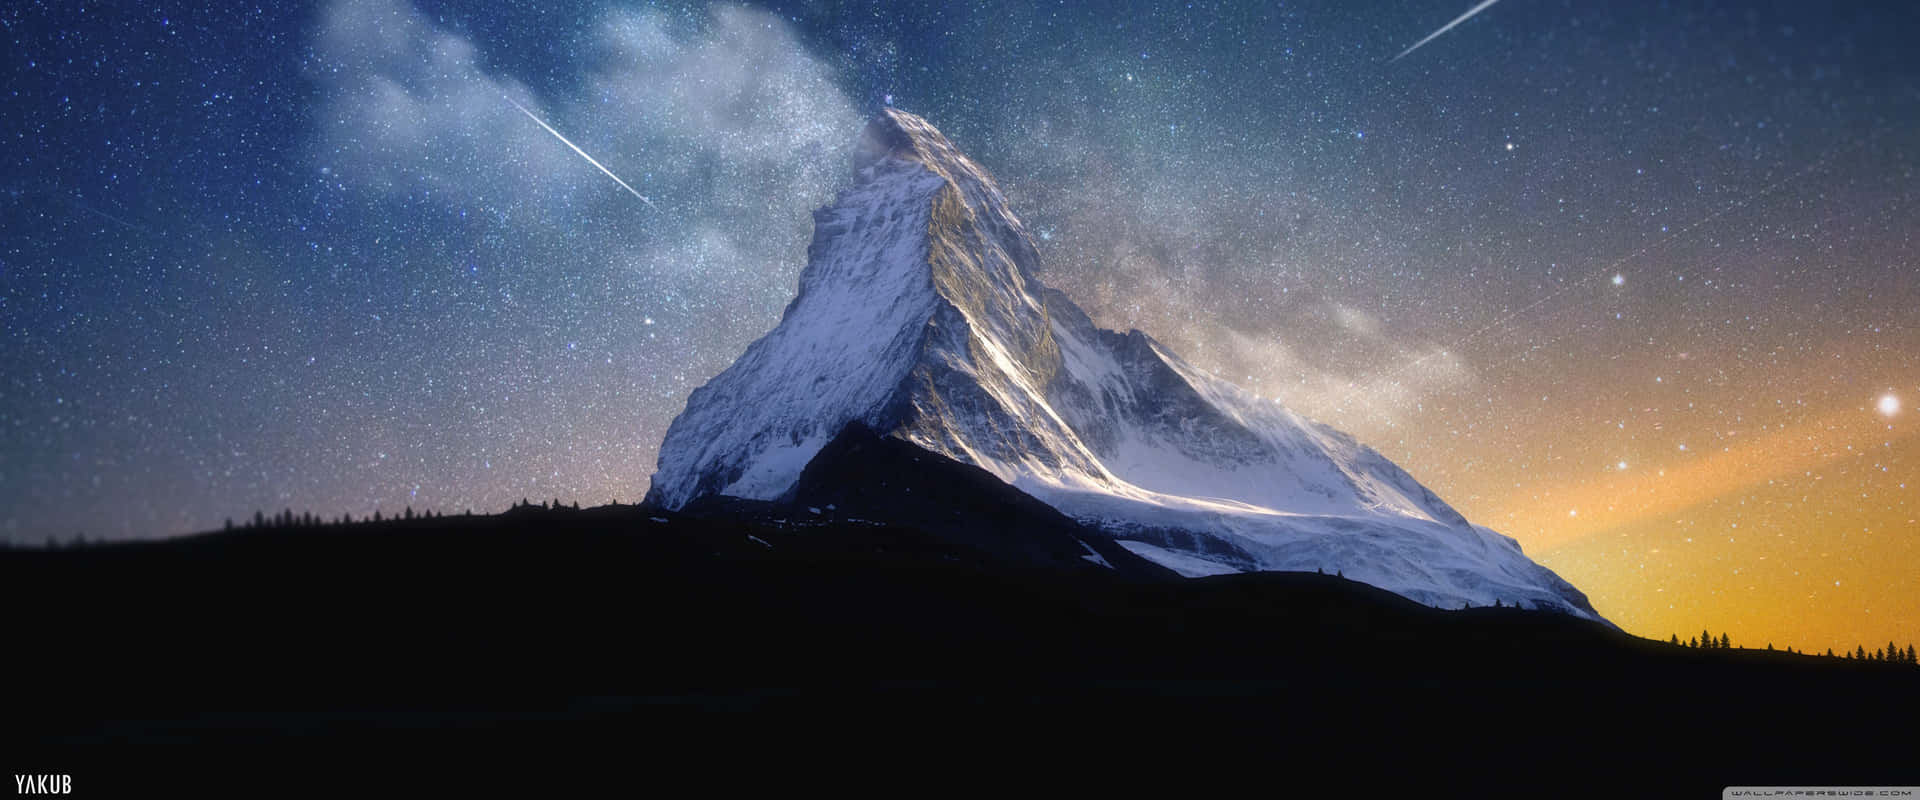 A Mountain With Stars And A Meteorite In The Sky Wallpaper